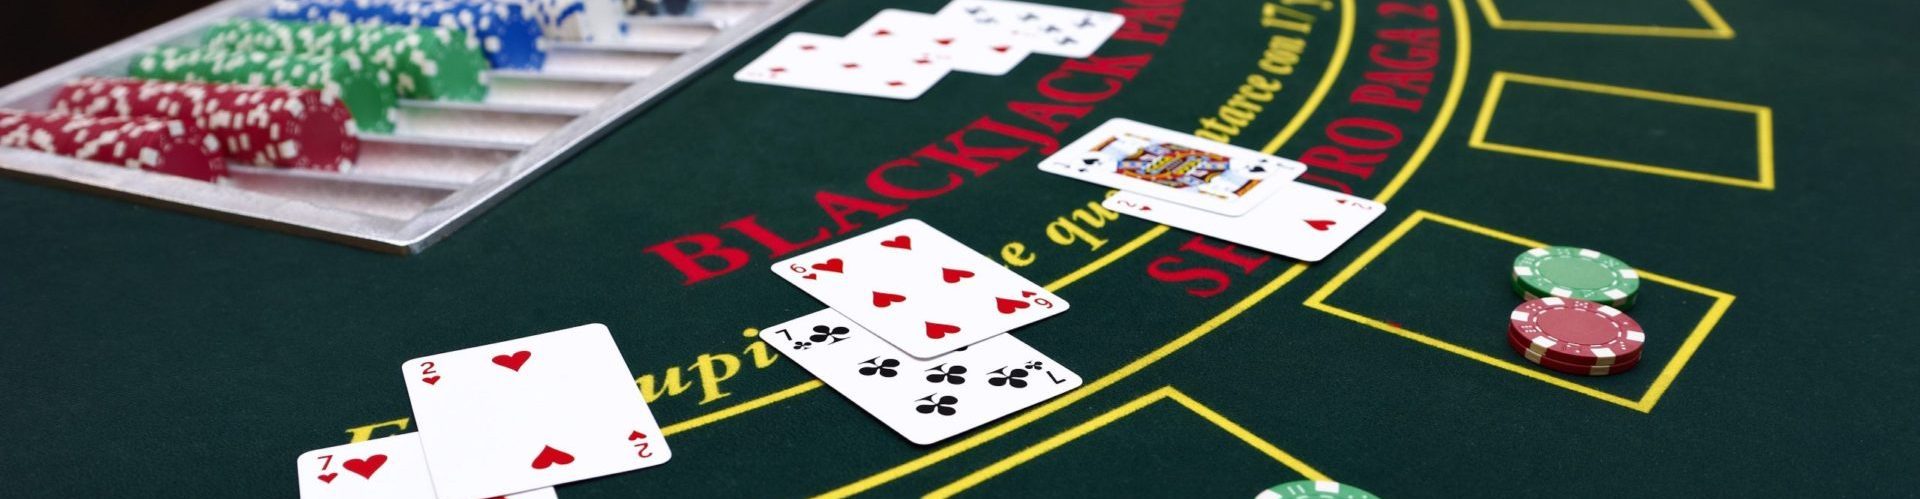 how to play black jack